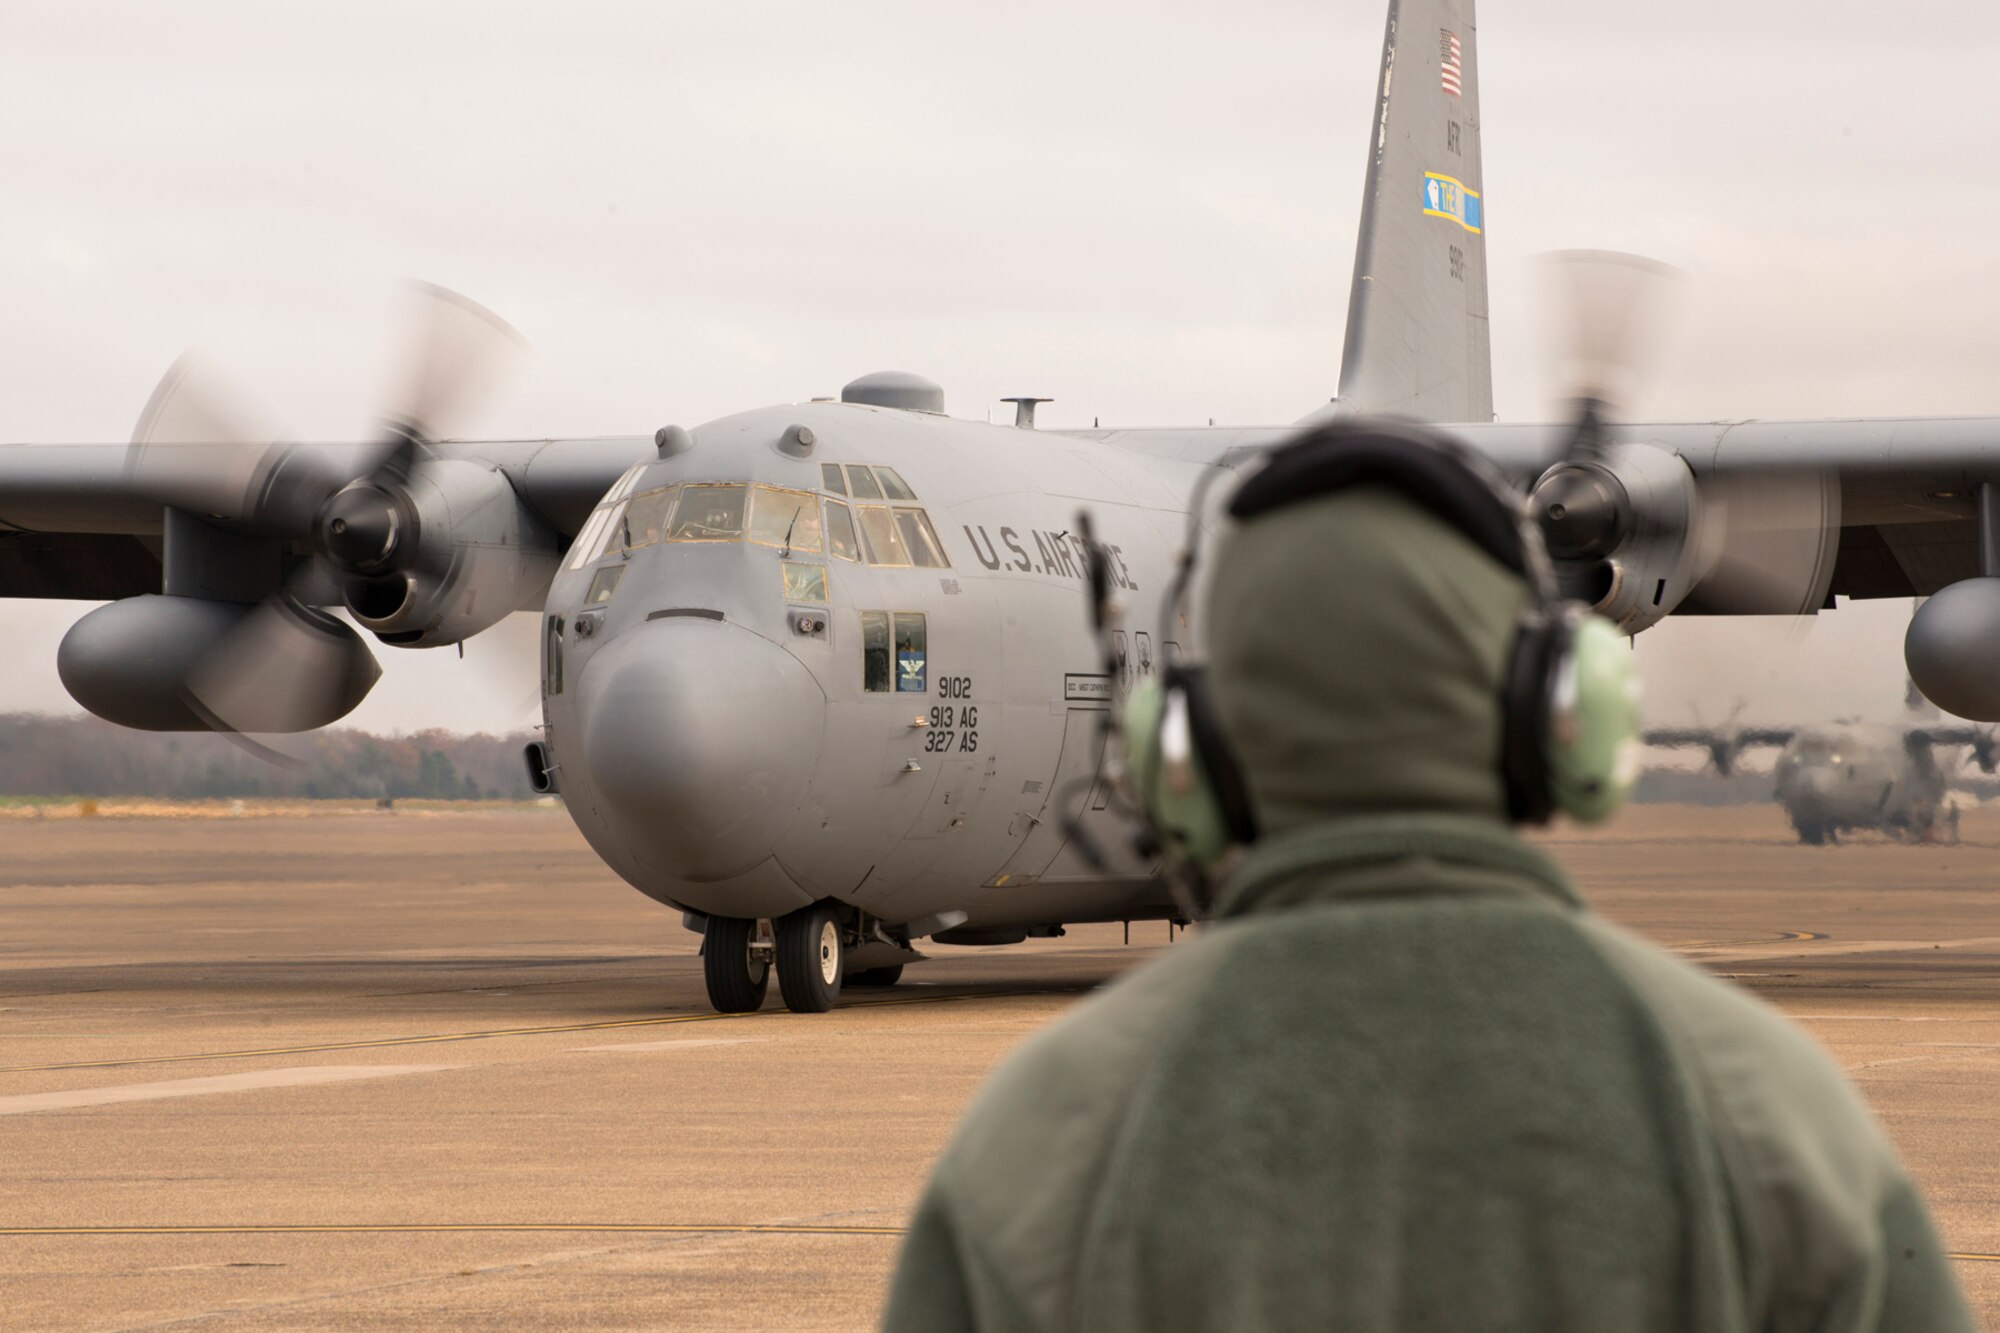 U.S. Air Force Tech Sgt. Timothy Hammonds, a crew chief assigned to the 913th Maintenance Squadron, waits to marshal a C-130H Hercules at Little Rock Air Force Base, Ark., Dec. 1, 2015. As a crew chief, Hammonds’ responsibilities include certifying the 913th Airlift Group’s aircraft are ready to complete Air Force missions. (U.S. Air Force photo by Master Sgt. Jeff Walston/Released) 